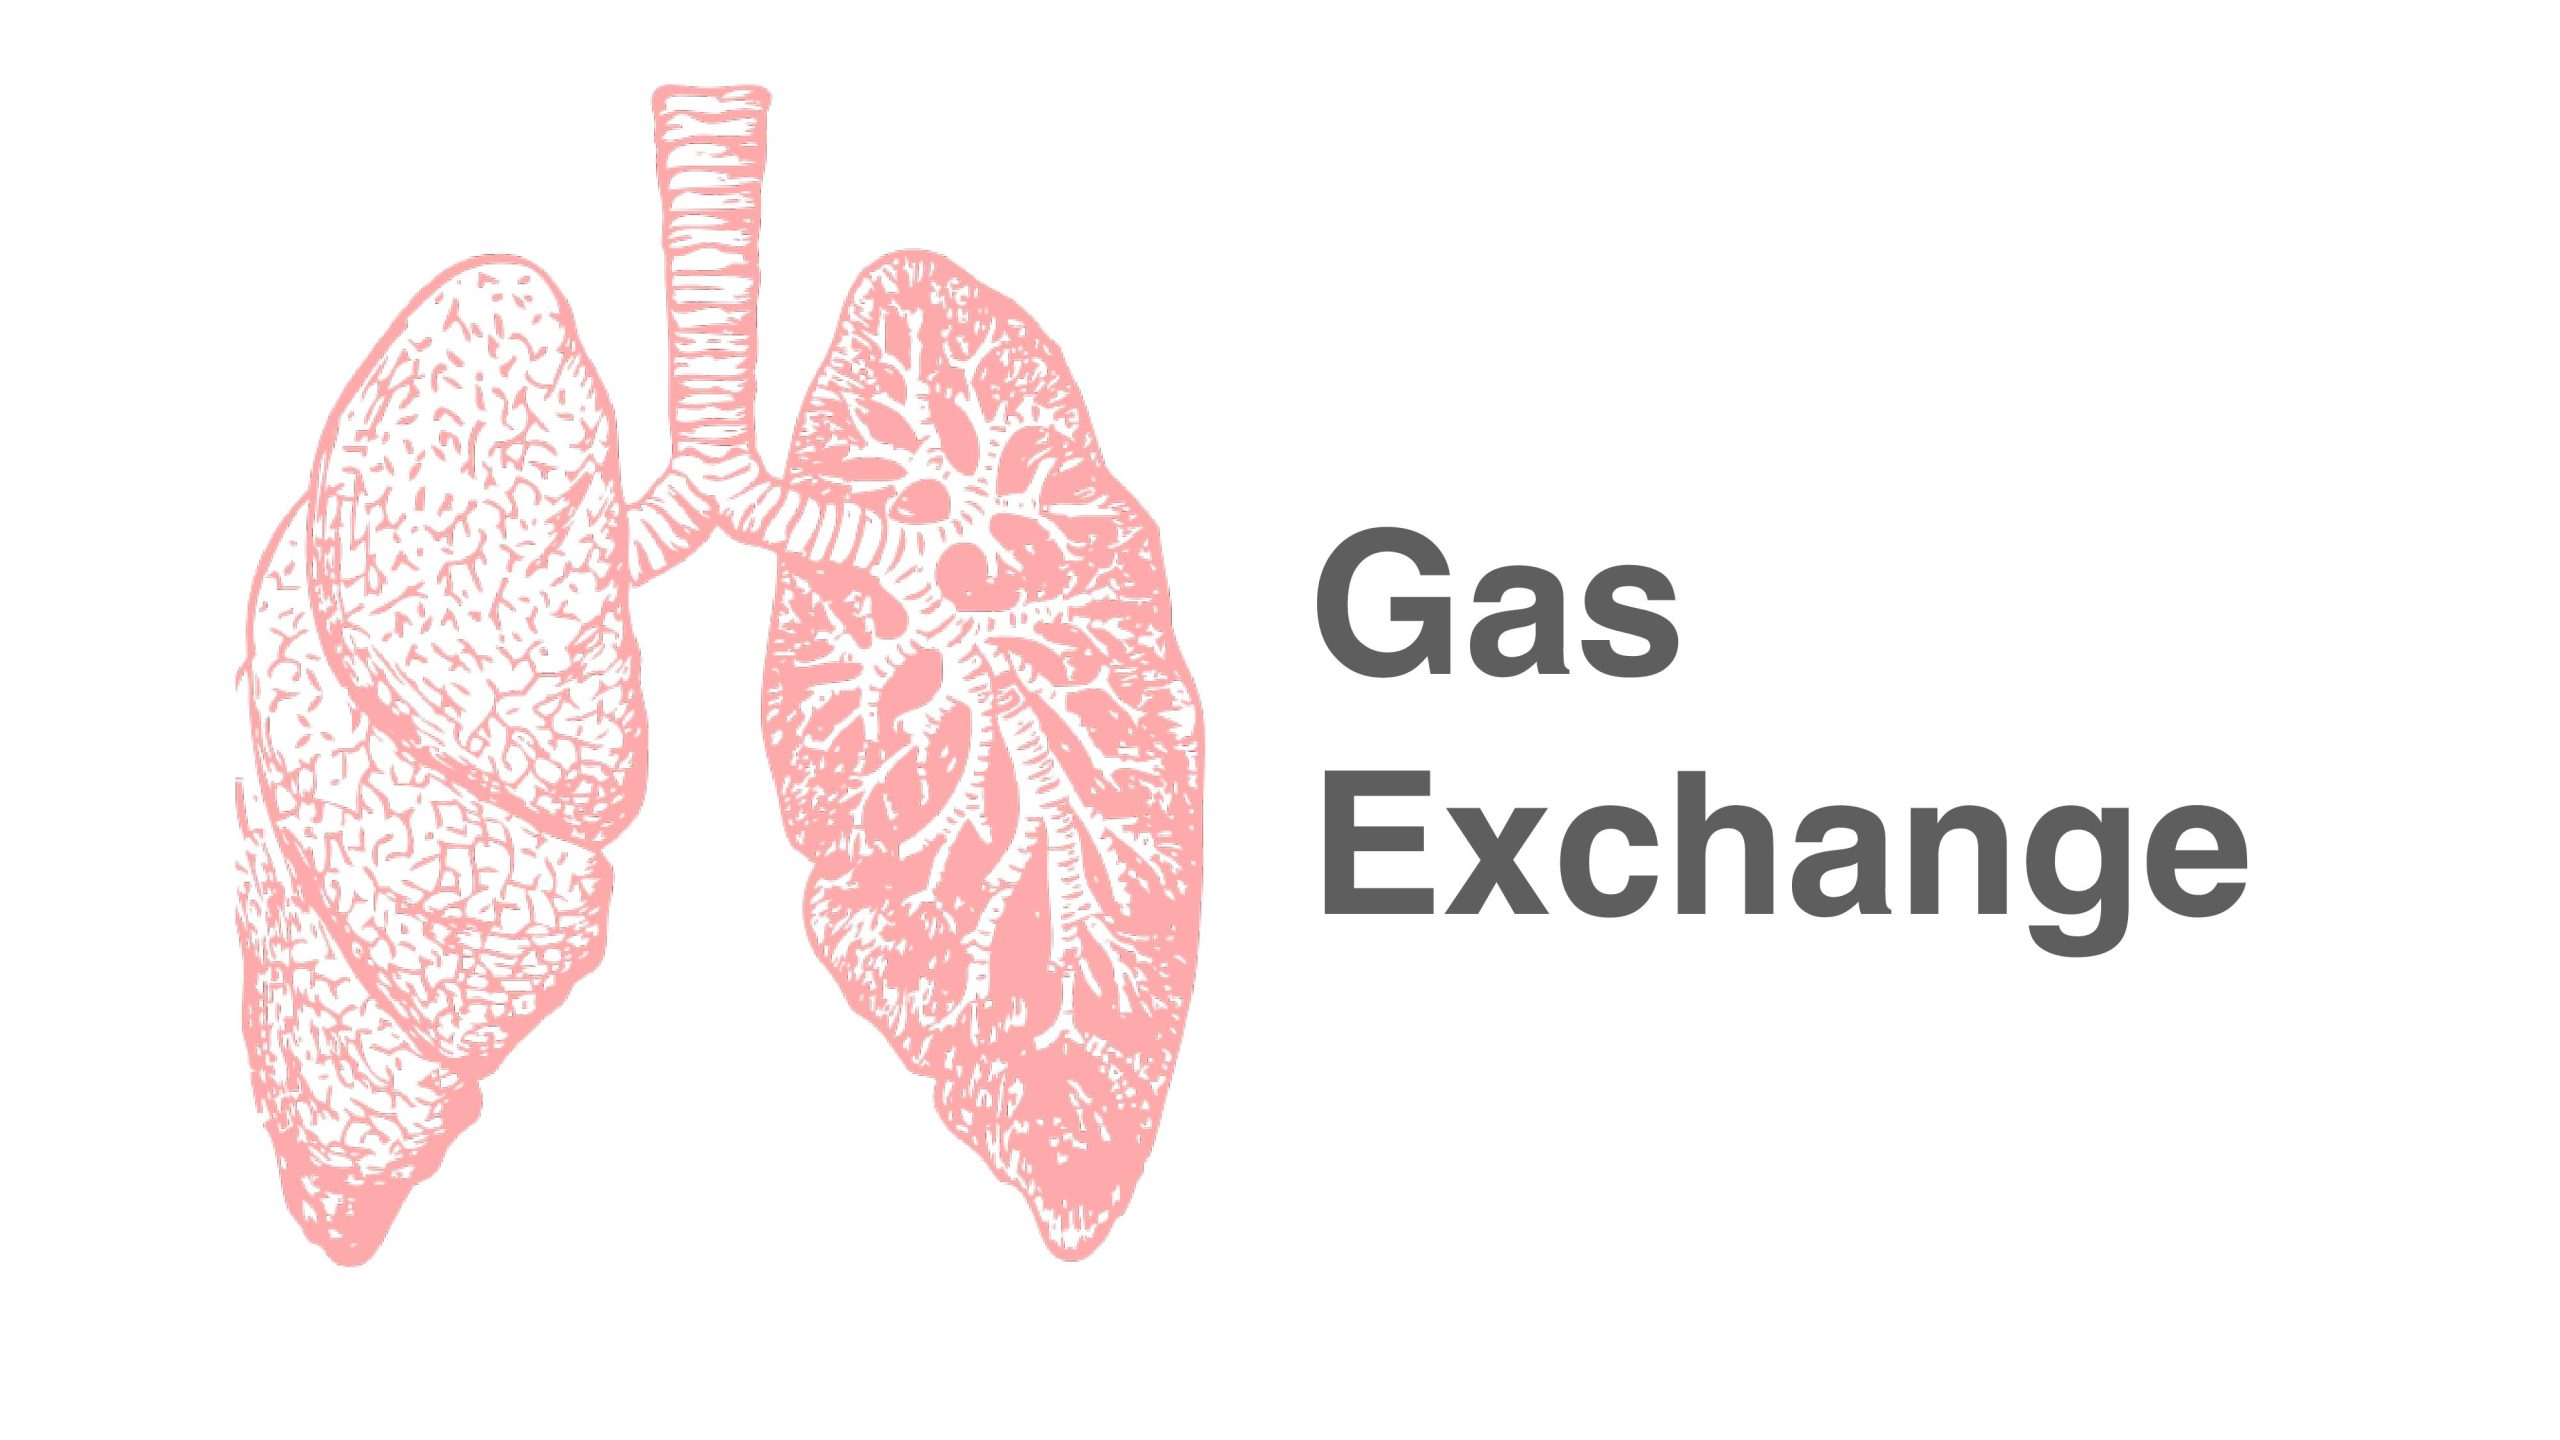 5. Gas Exchange